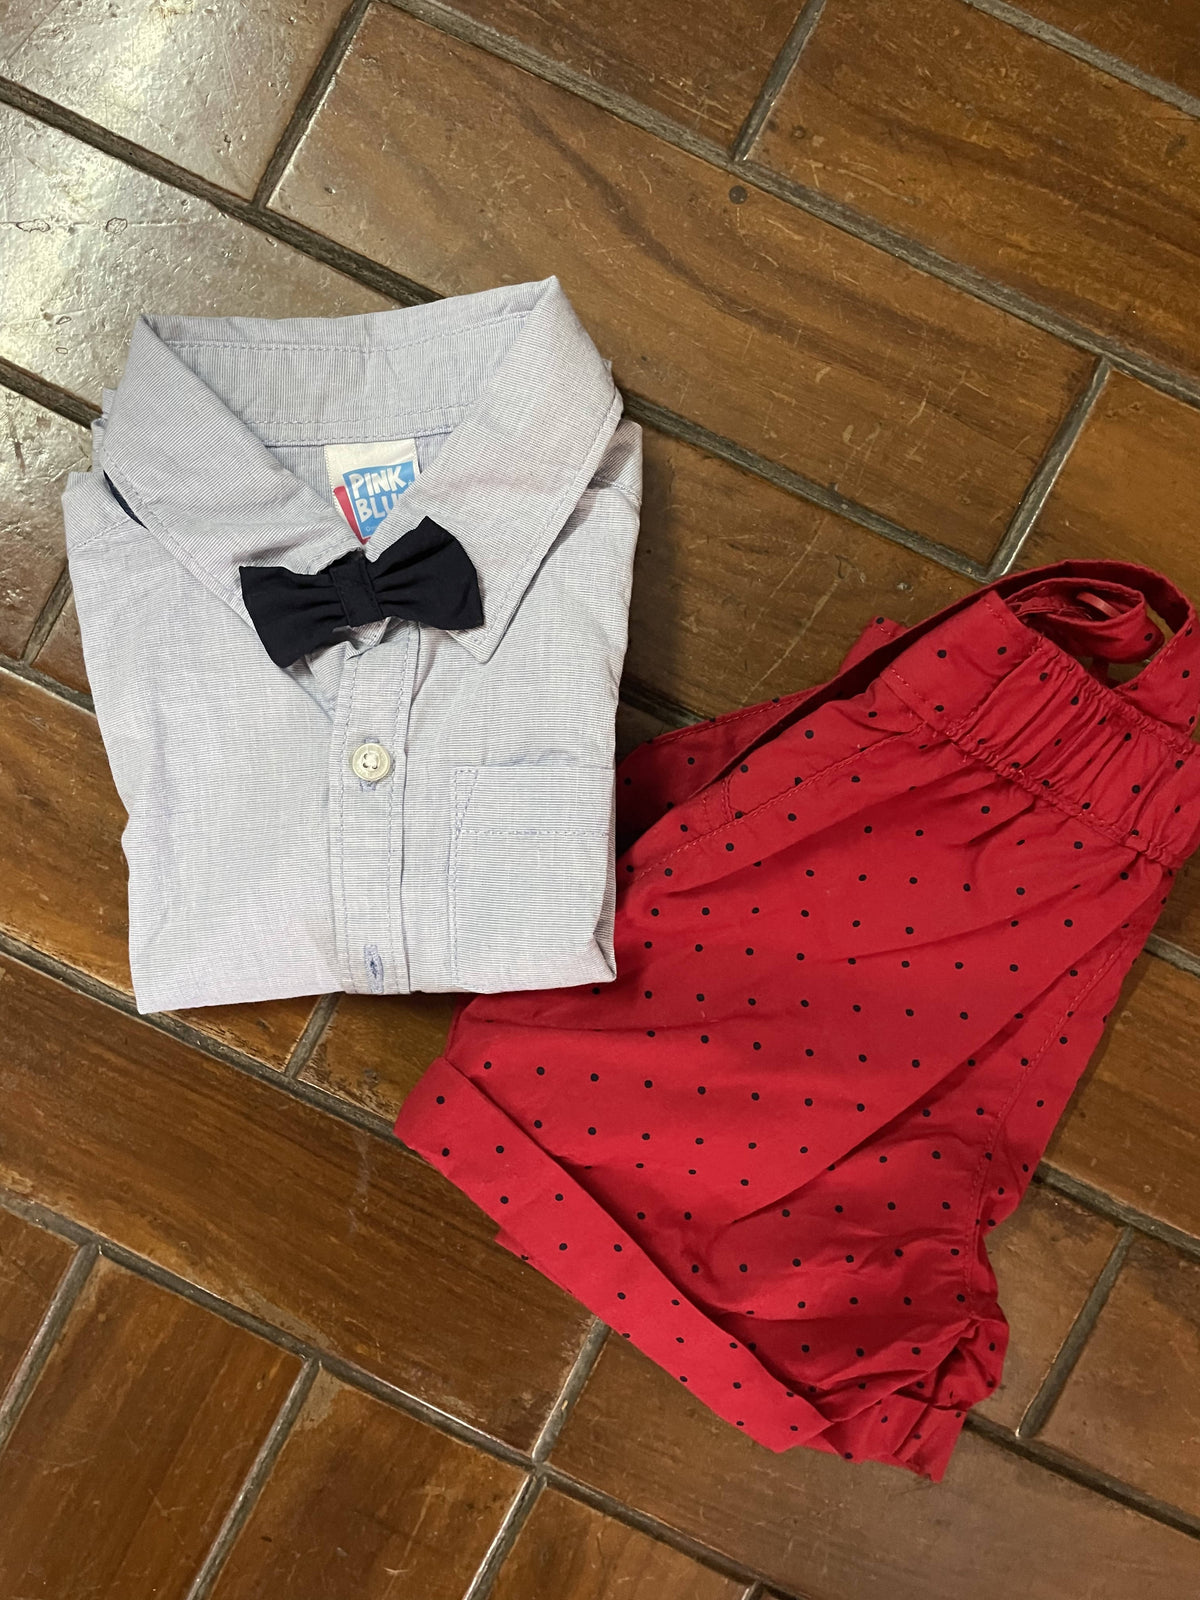 Blue shirt with bow tie and red dungaree